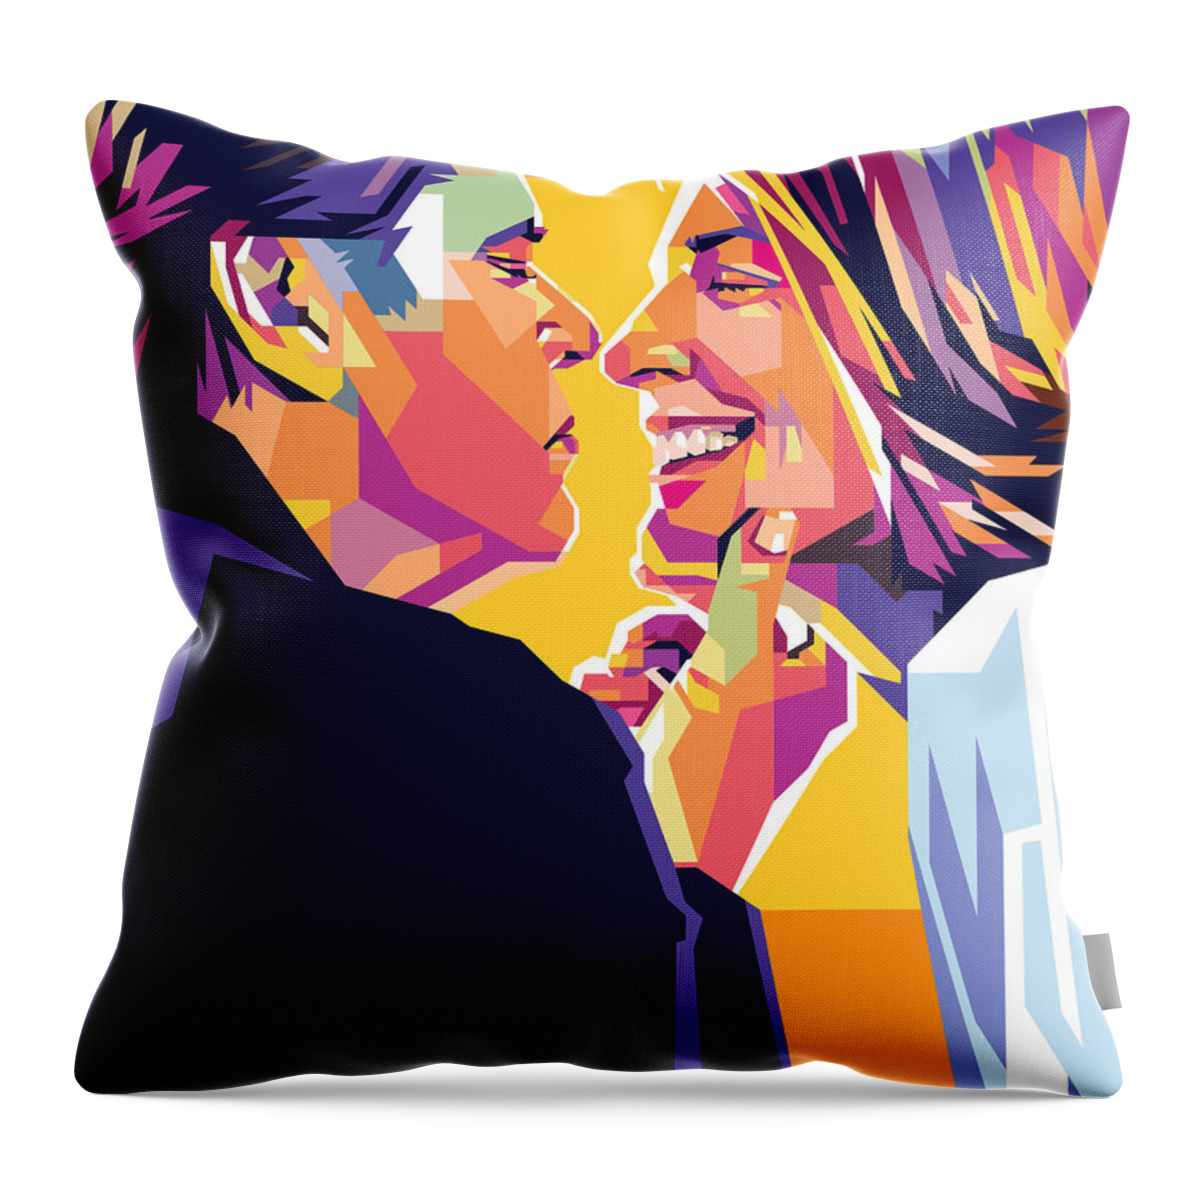 Jack Throw Pillow featuring the digital art Jack Nicholson and Diane Keaton by Stars on Art